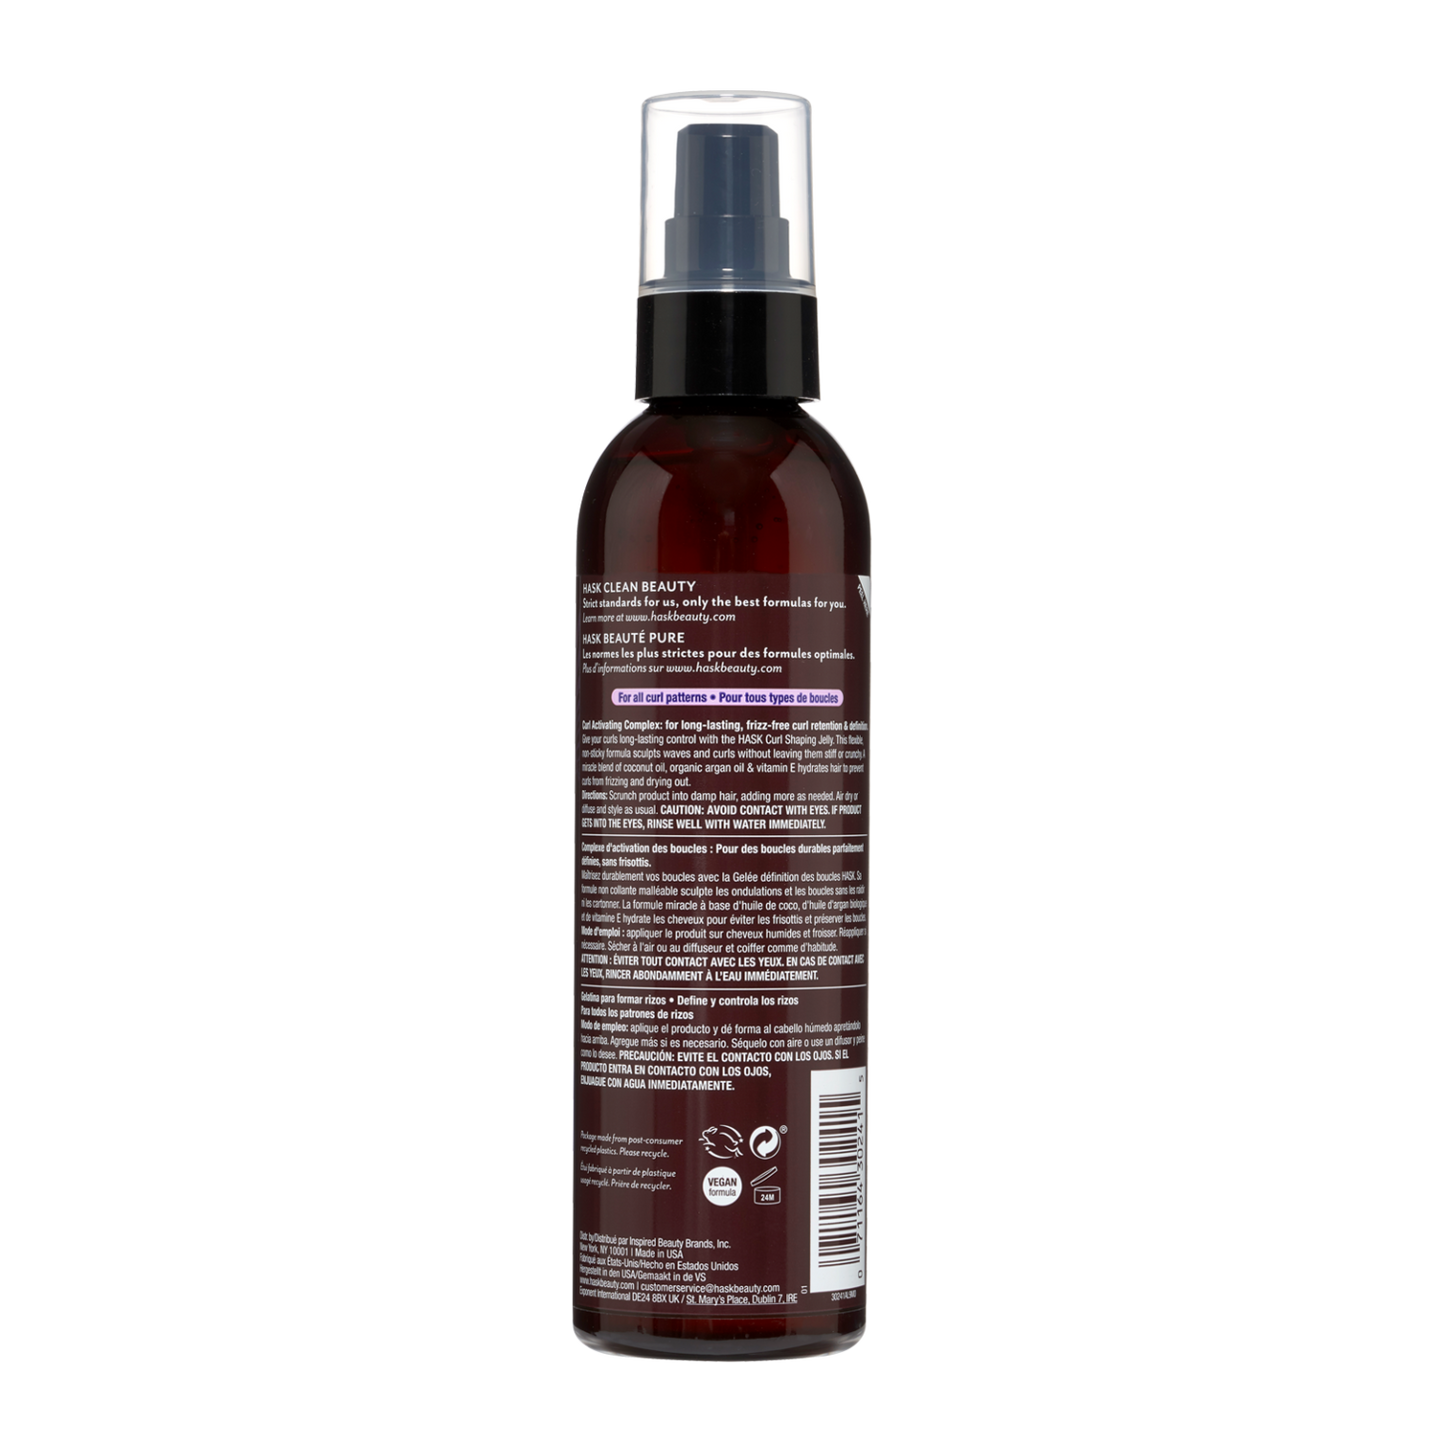 Curl Care Curl Shaping Jelly 175ml